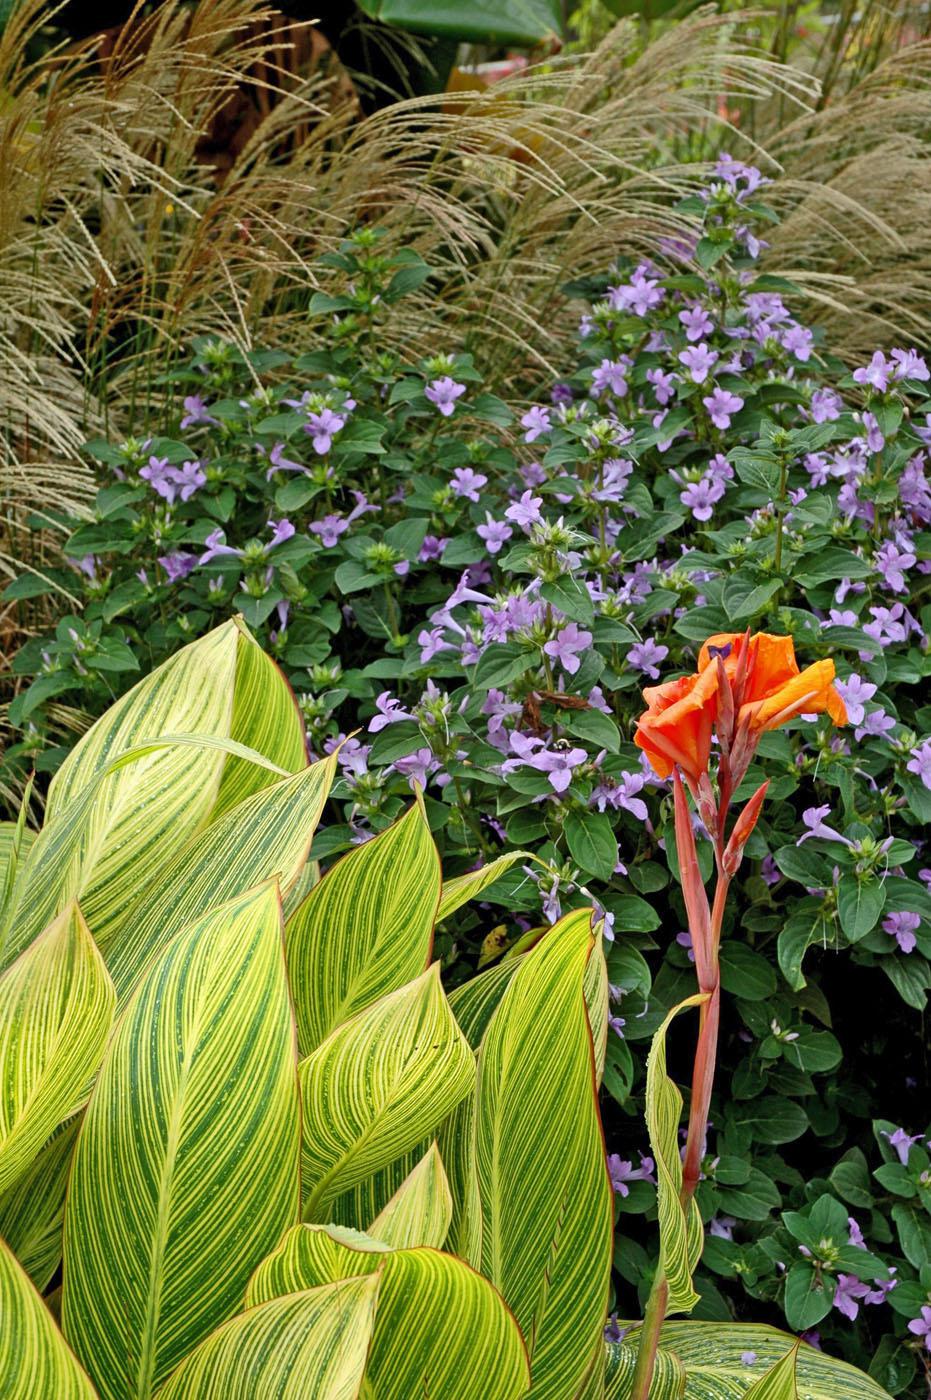 The Philippine violet is planted in front of maiden grasses' golden plumes that tower over the violet and dance in the wind. Flanking this are several Bengal tiger cannas. The striped green and gold foliage contrasts with the violet flowers. (Photos by Norman Winter/MSU Extension Service)